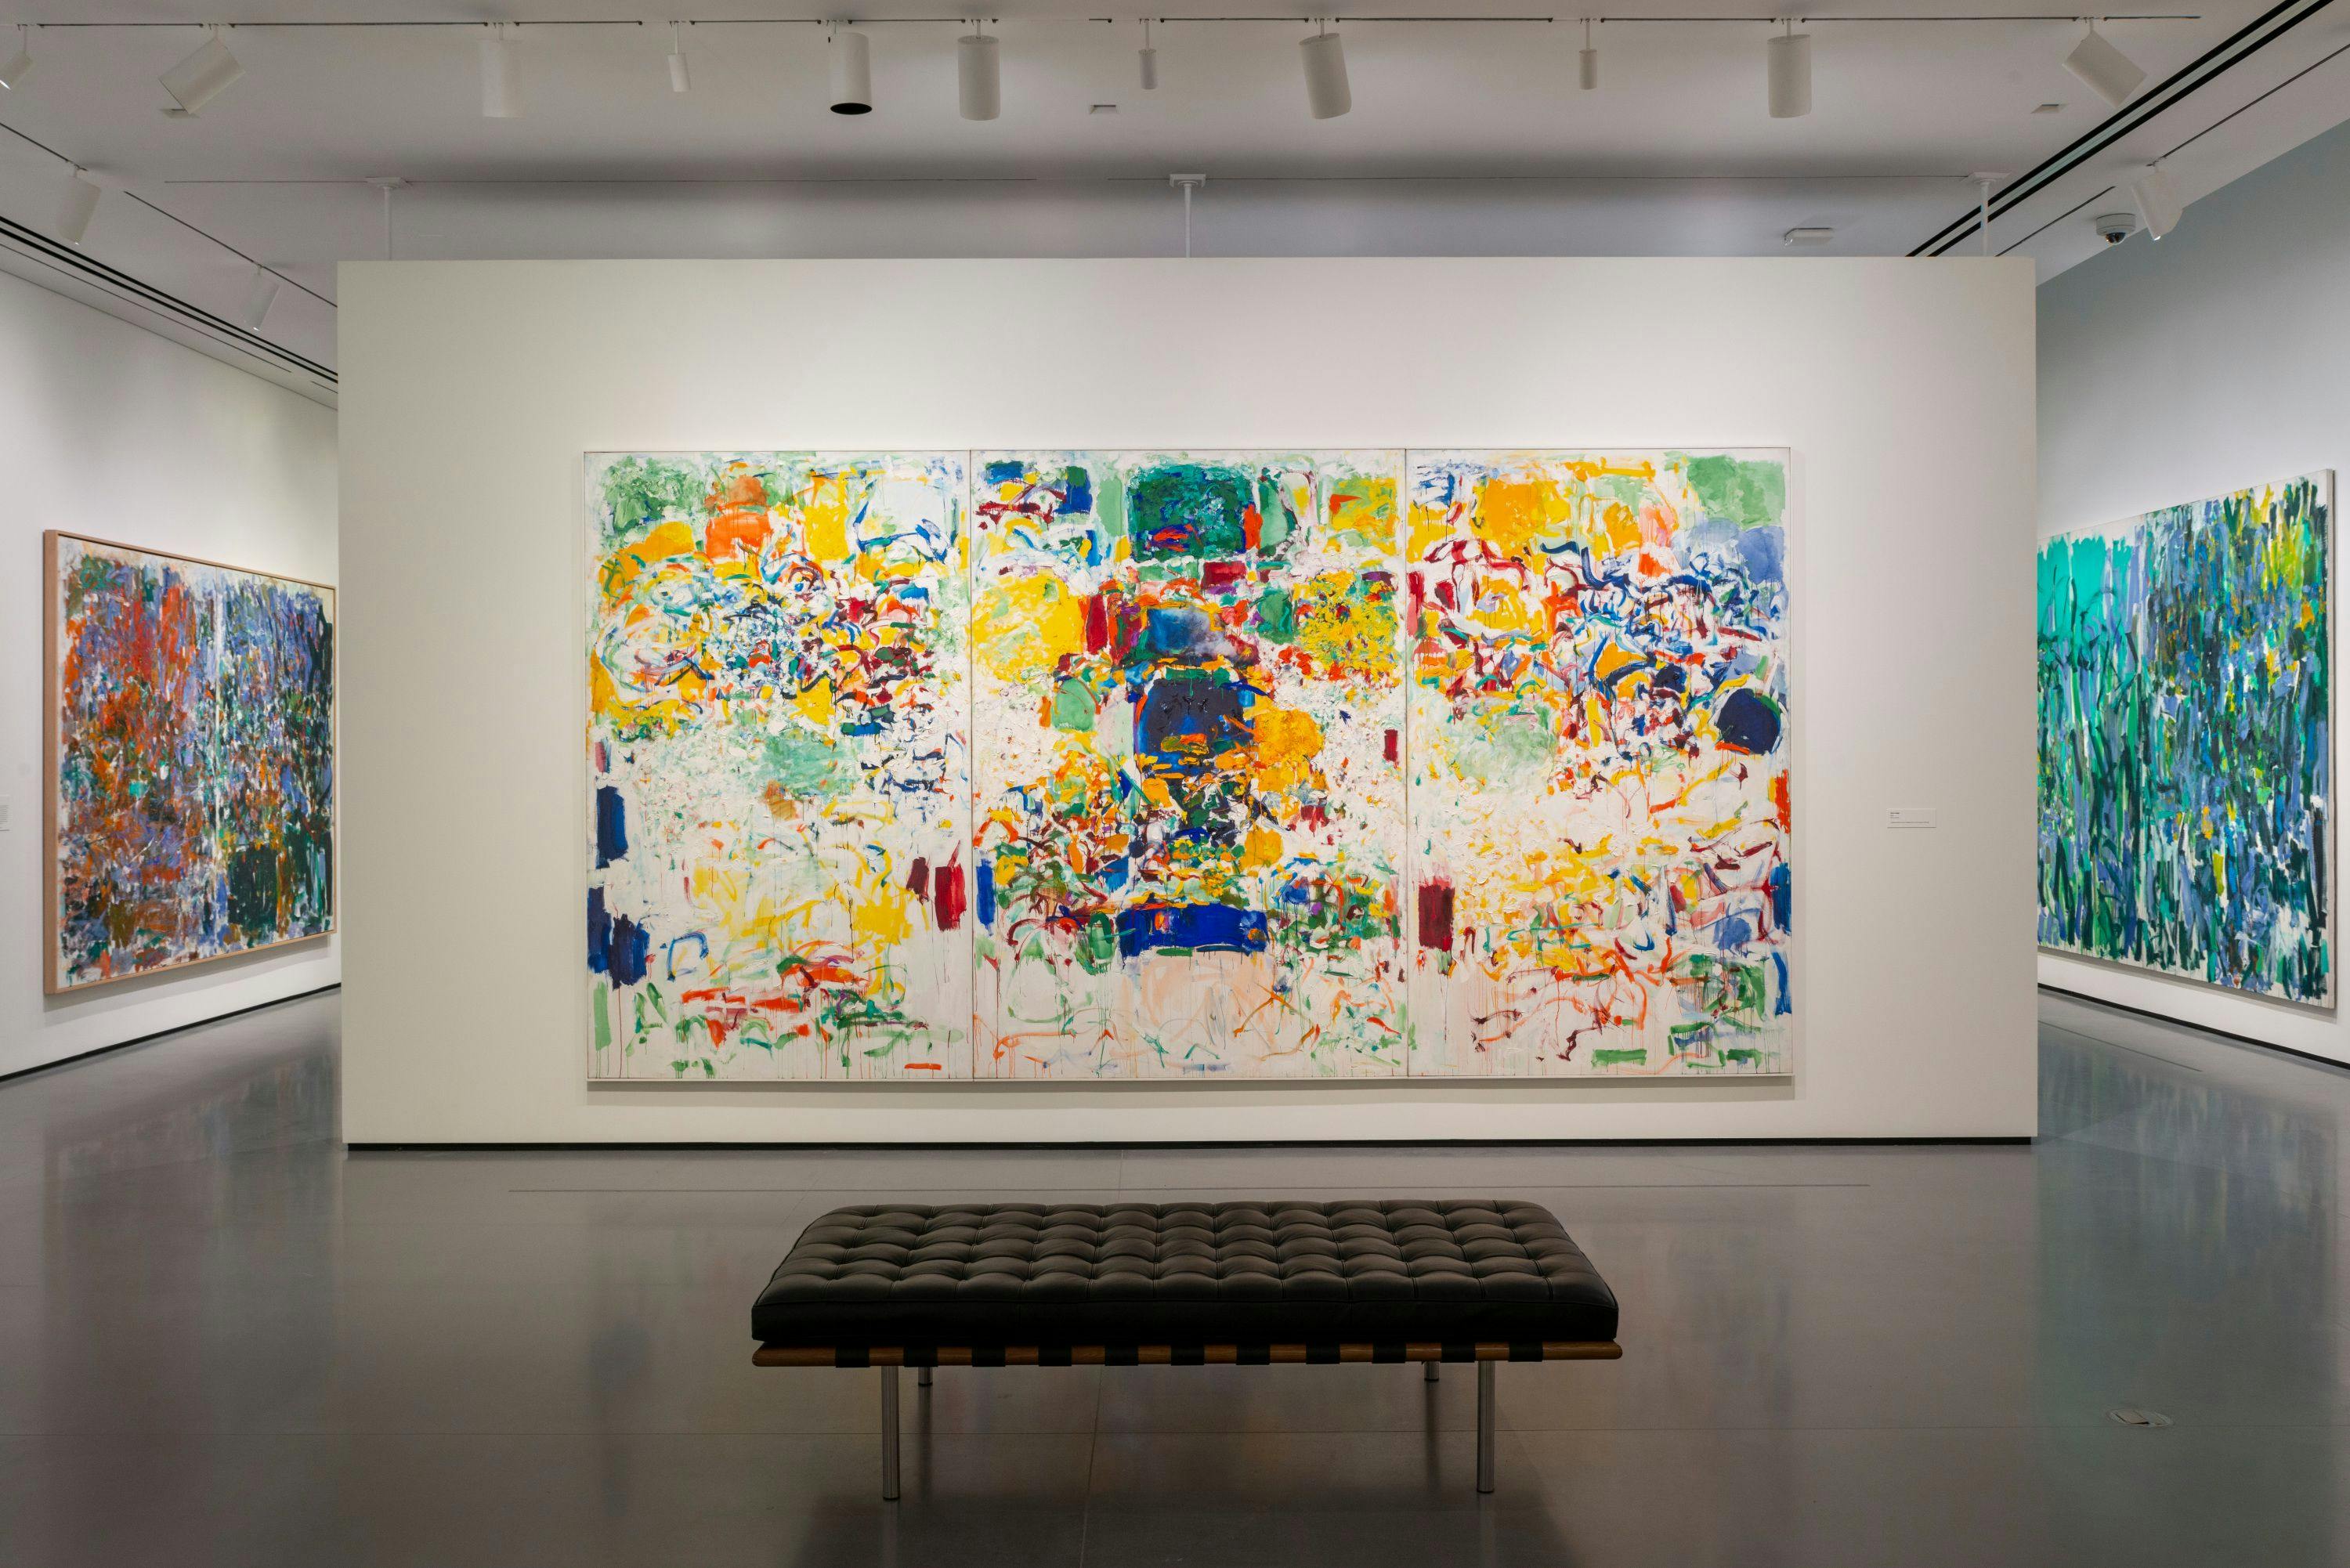 Installation view of the exhibition, Joan Mitchell, at Baltimore Museum of Art in Baltimore, dated 2022.